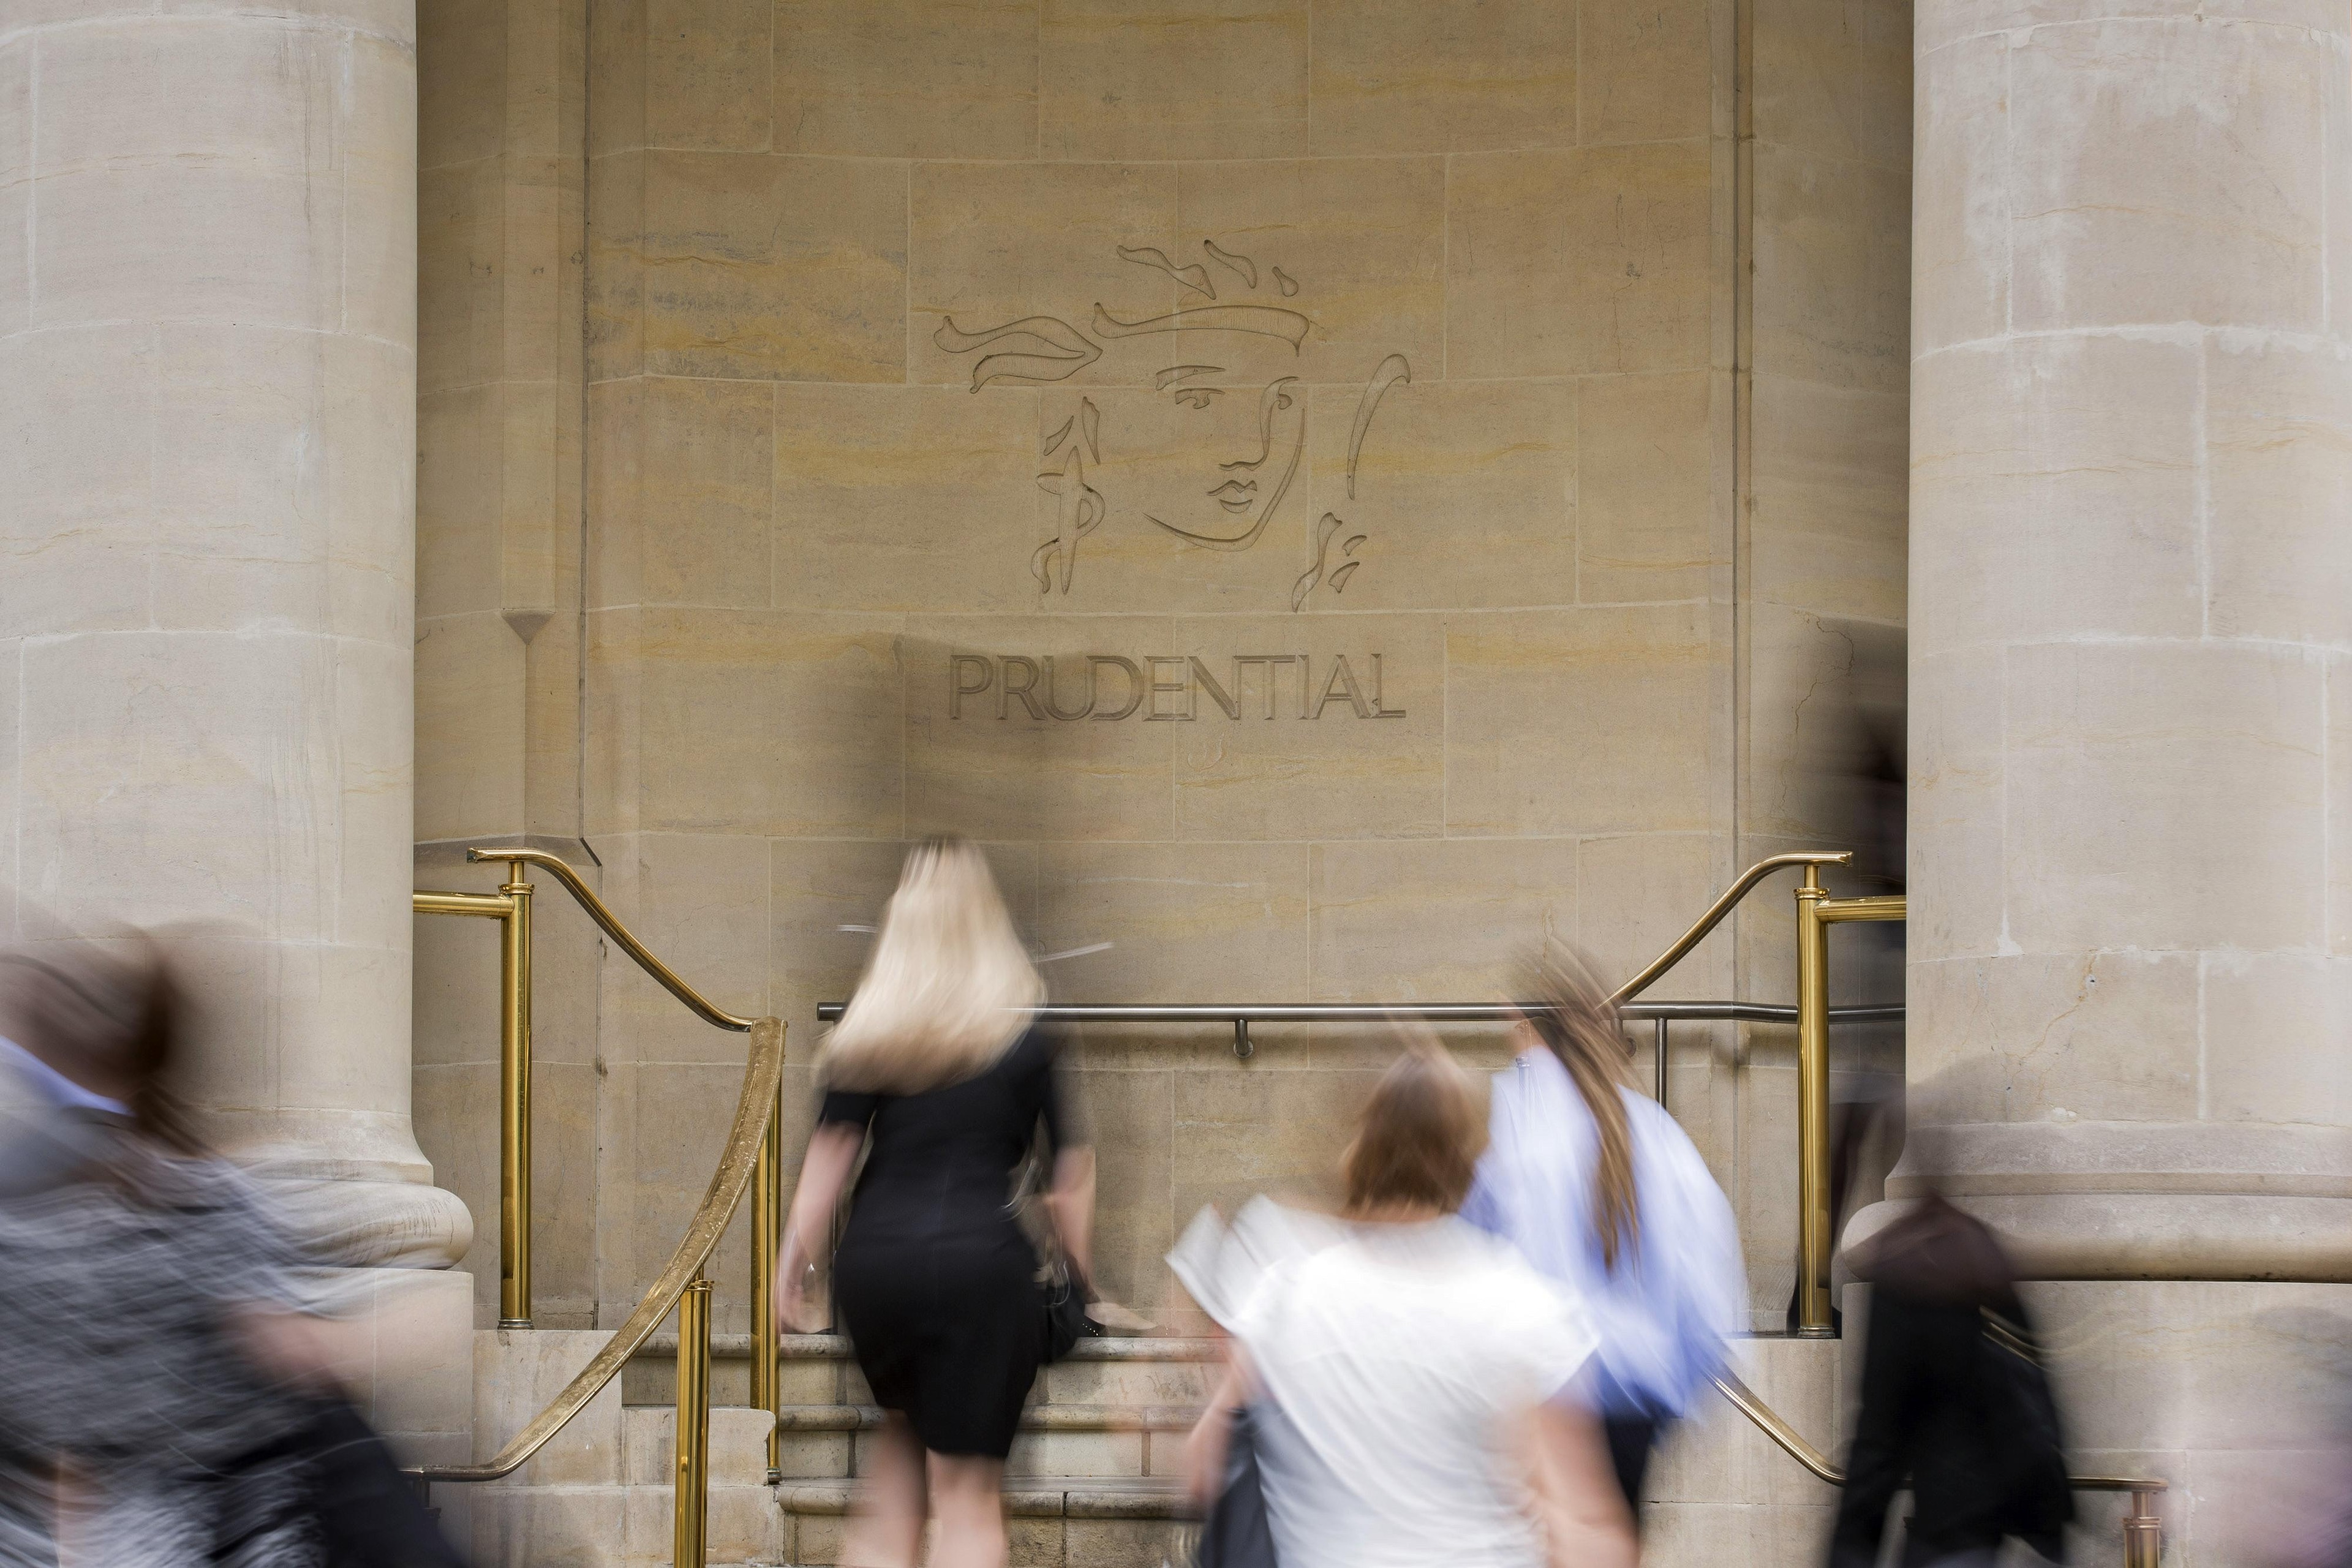 Prudential share price: Is another company split on the cards?